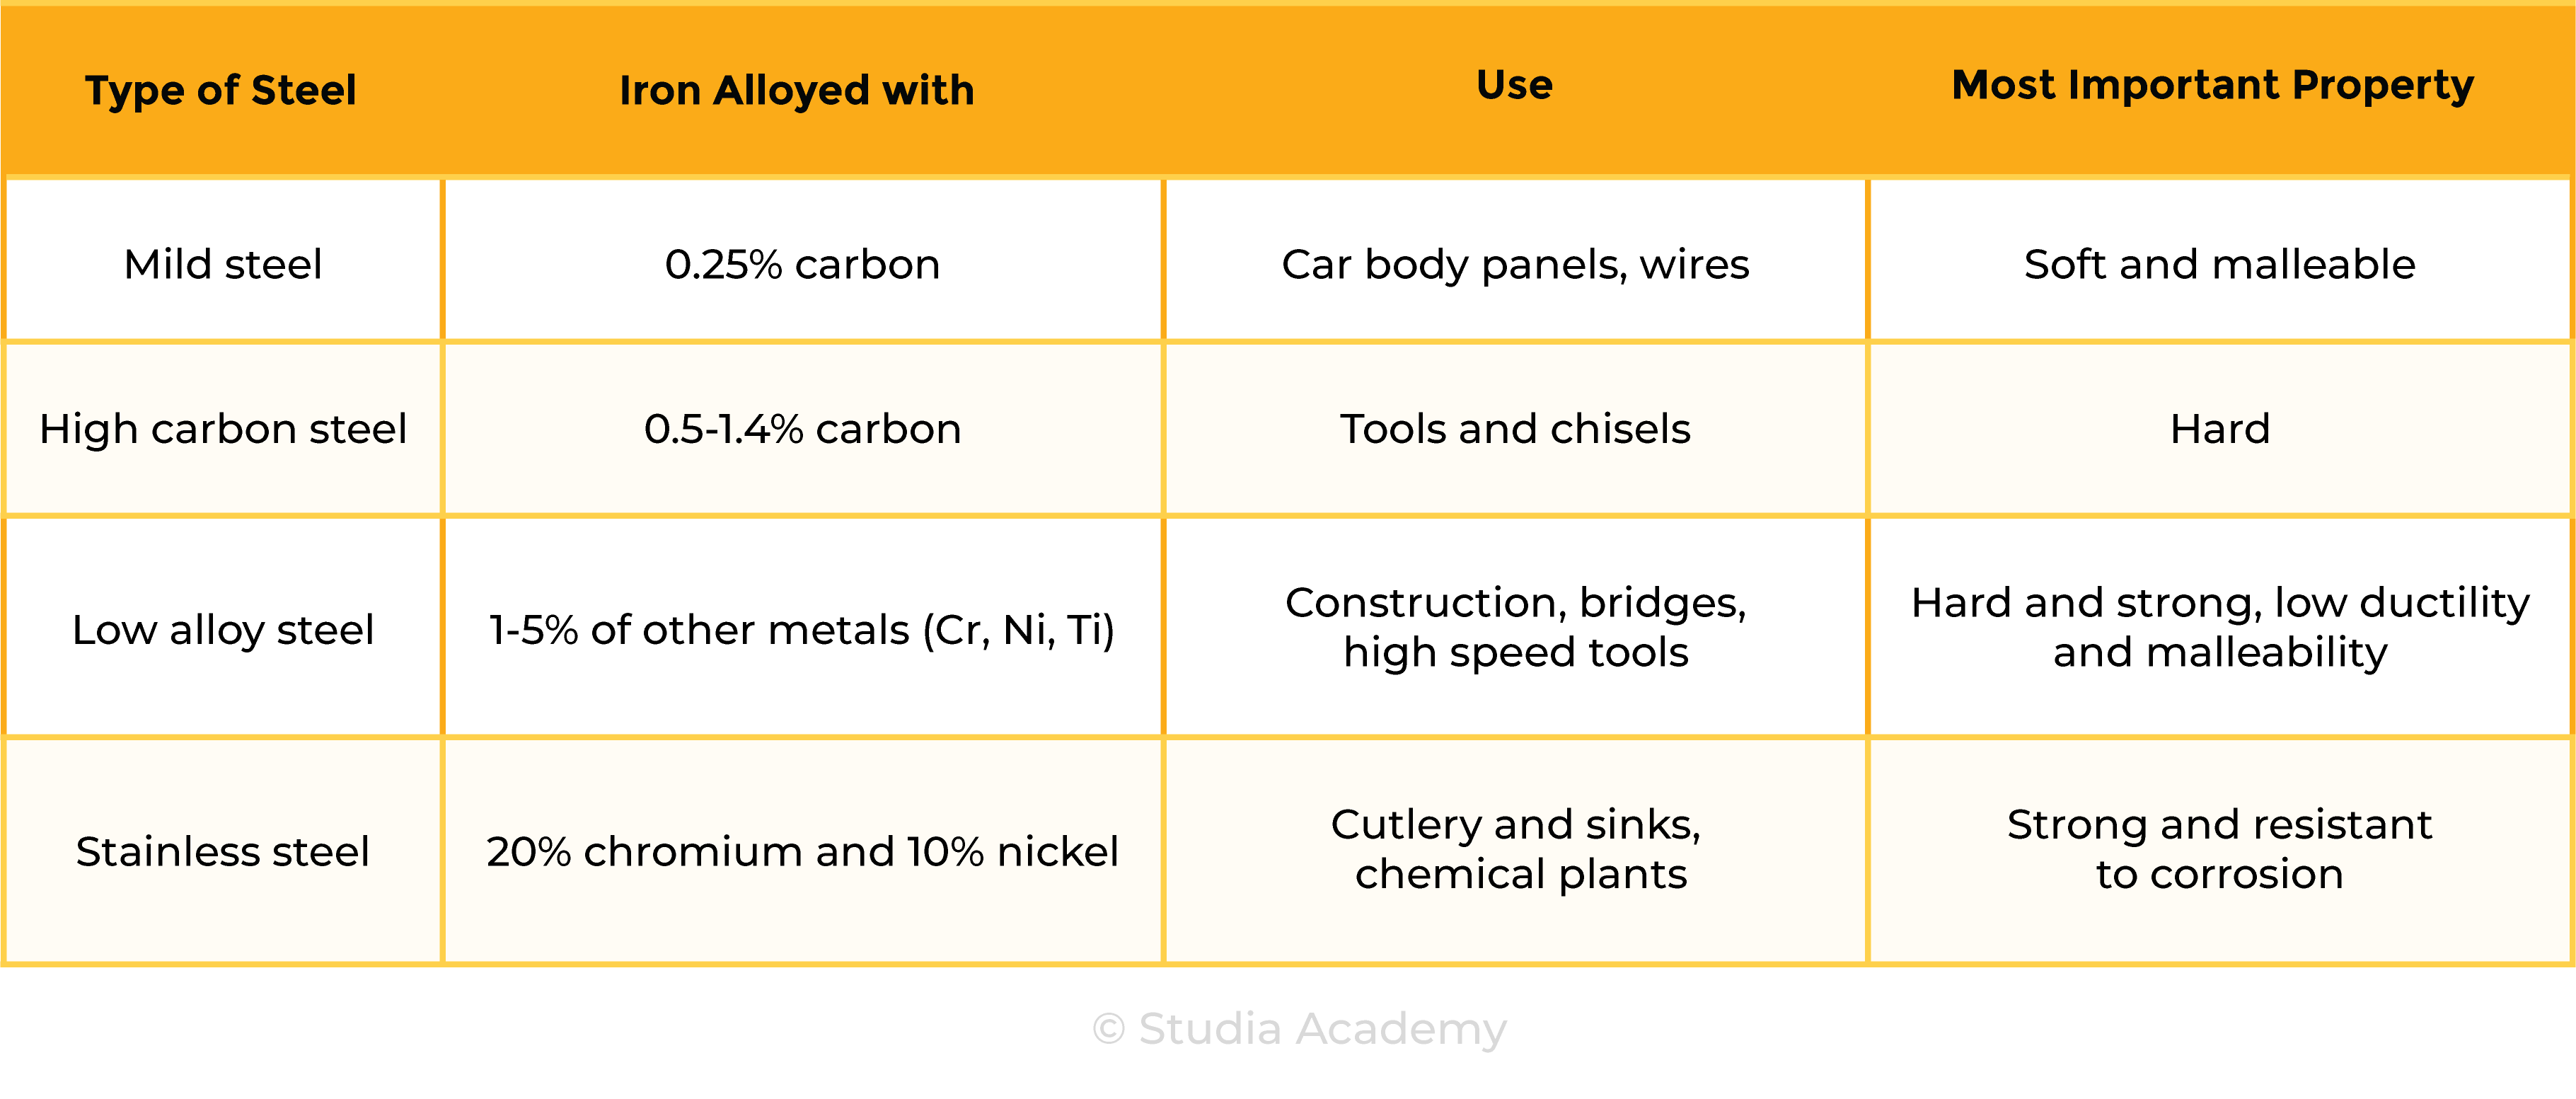 edexcel_igcse_chemistry_topic 14 tables_extraction and uses of metals_004_uses of steel